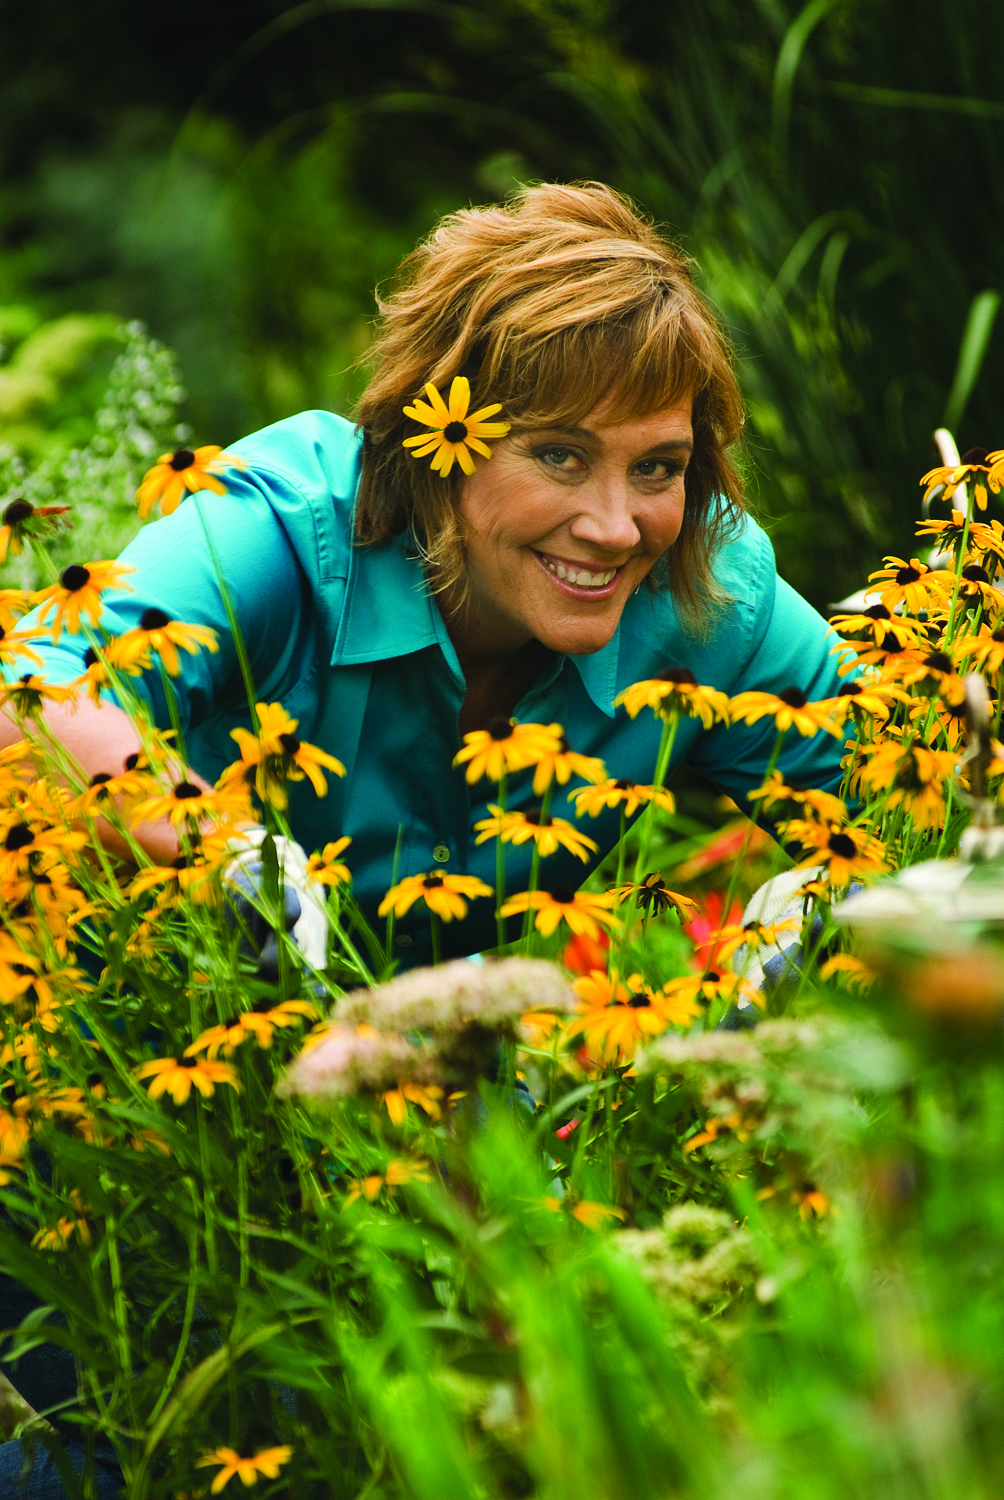 Melinda Myers, Gardening Expert, to appear at St. Louis Home & Garden Show